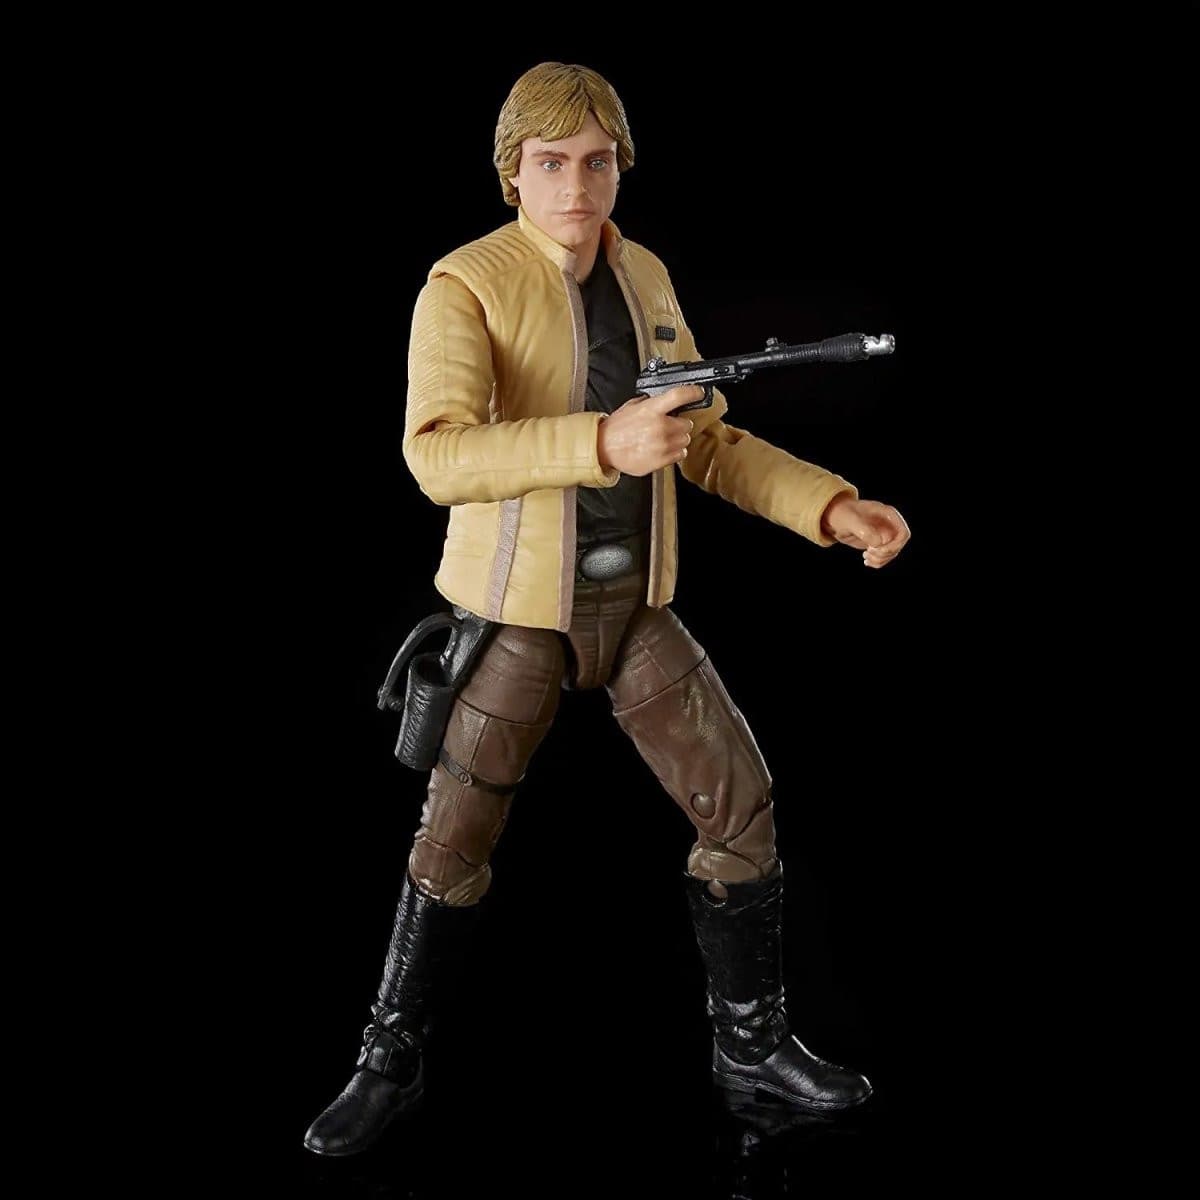 Star Wars: A New Hope The Black Series Luke Skywalker (Yavin Ceremony) Toy 6-inch Scale Collectible Figure - Simon's Collectibles